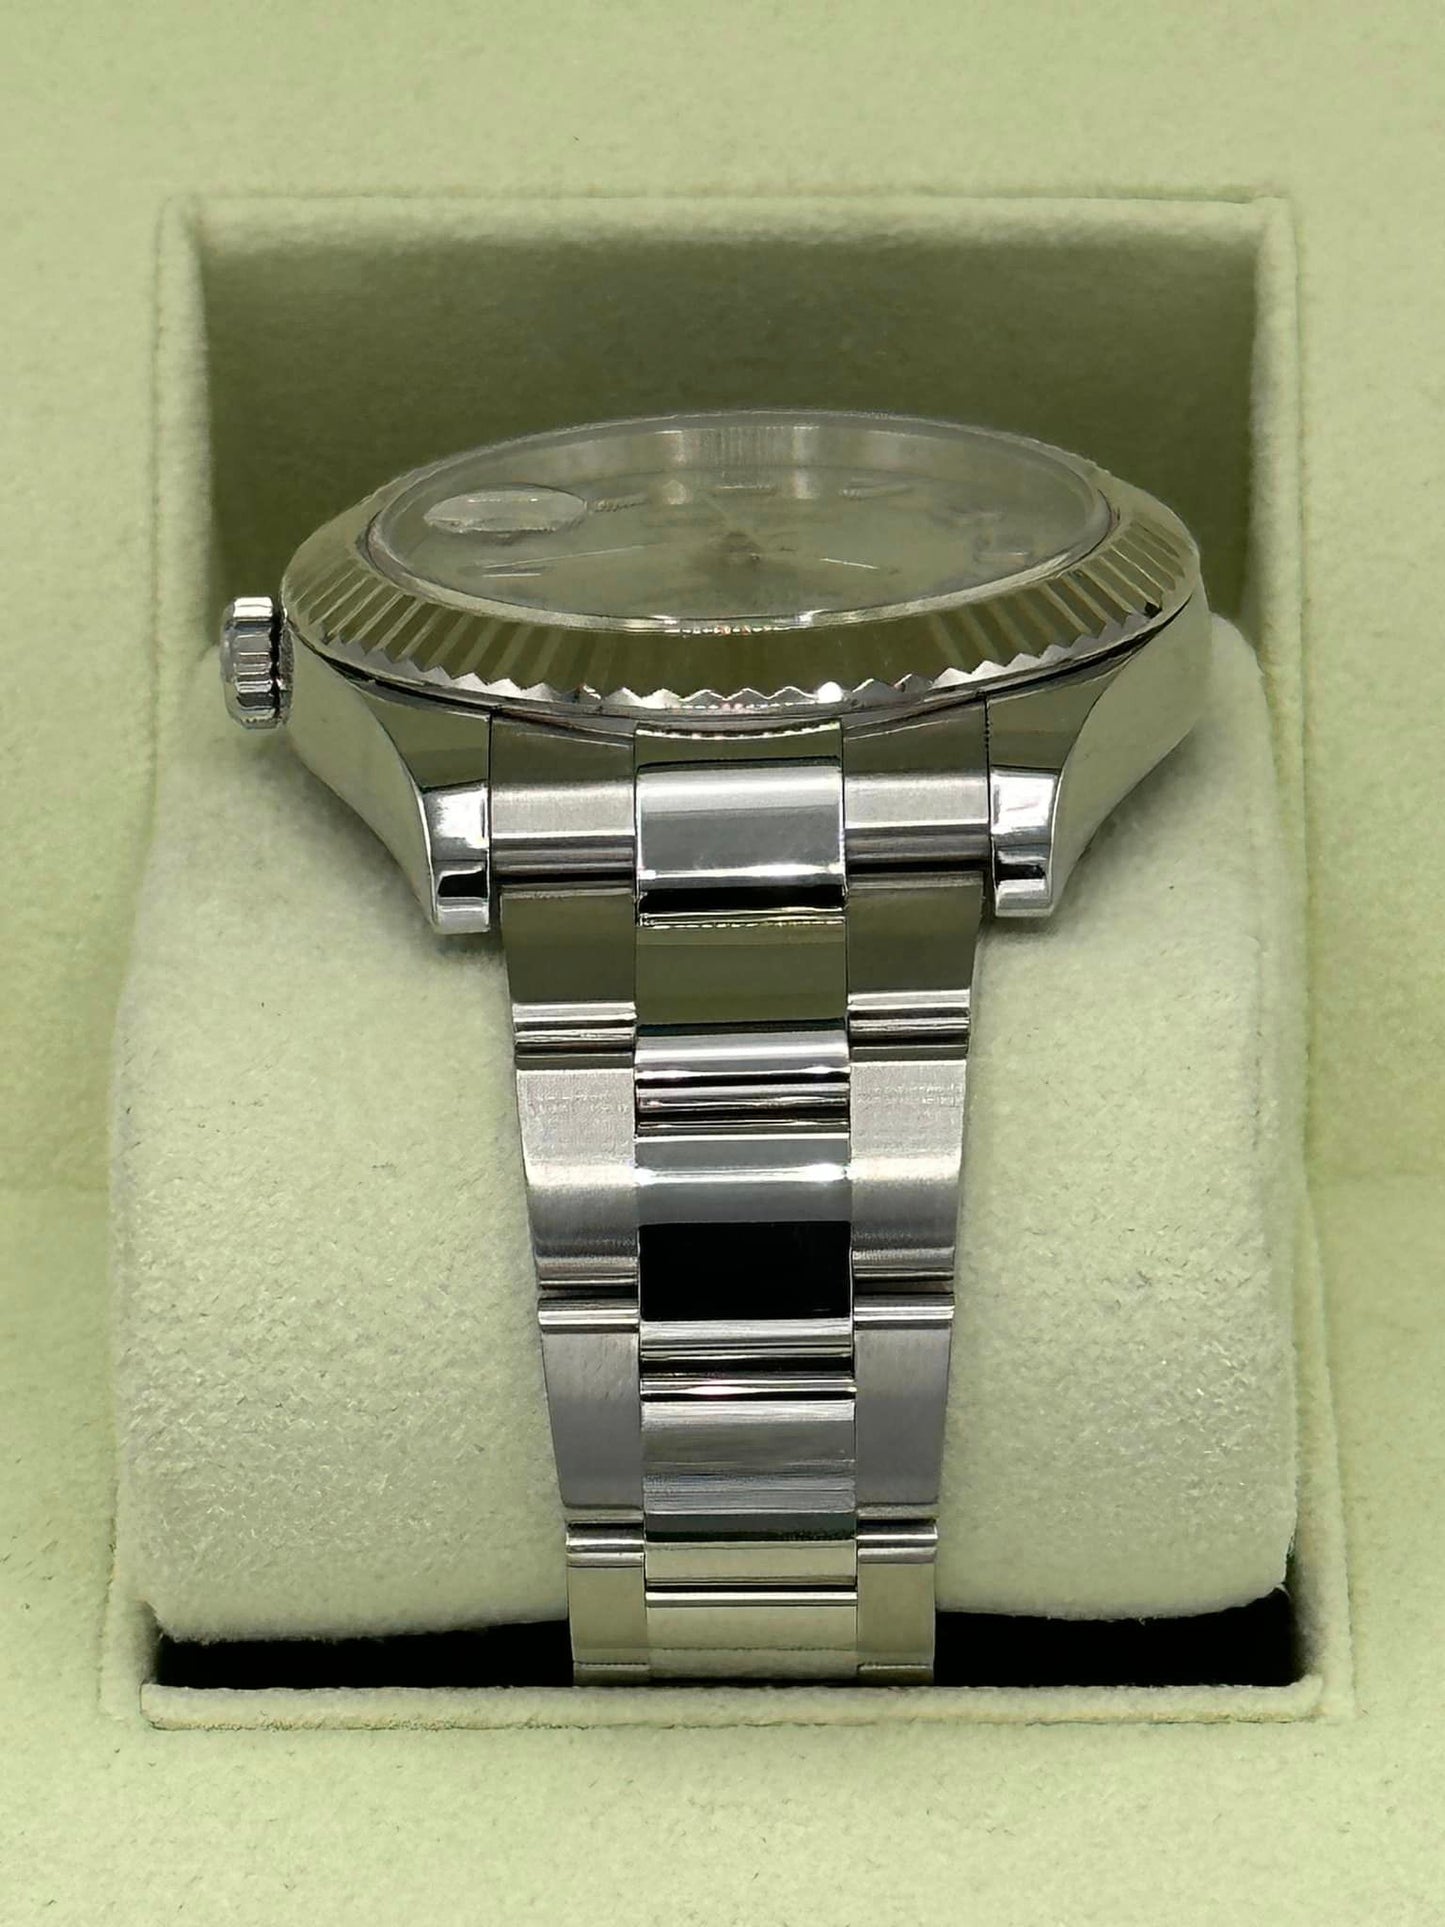 2012 Rolex Datejust II 41mm 116334 Stainless Steel Oyster Bracelet - MyWatchLLC